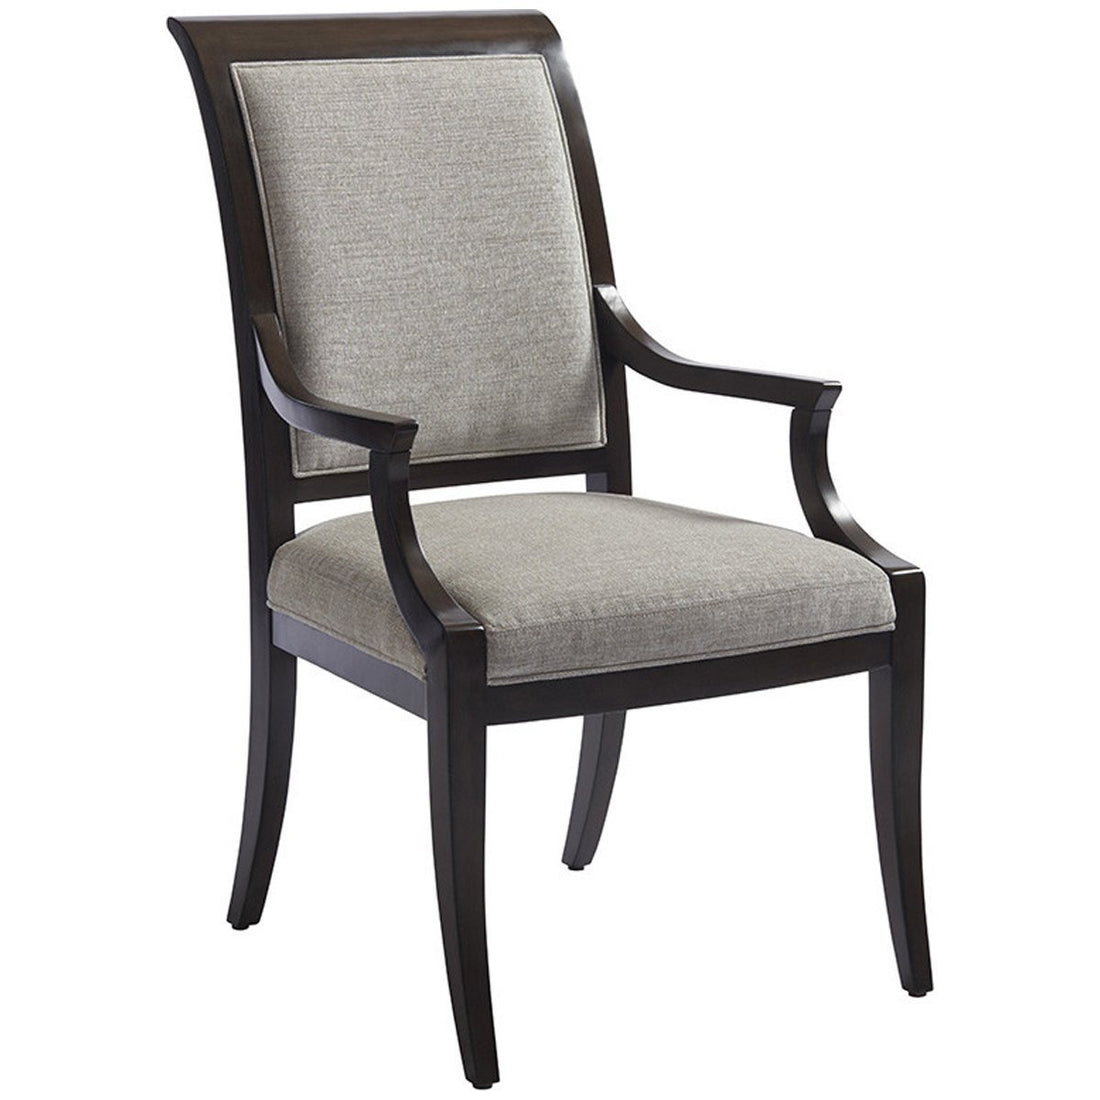 Lexington Barclay Butera Brentwood Kathryn Upholstered Arm Chair